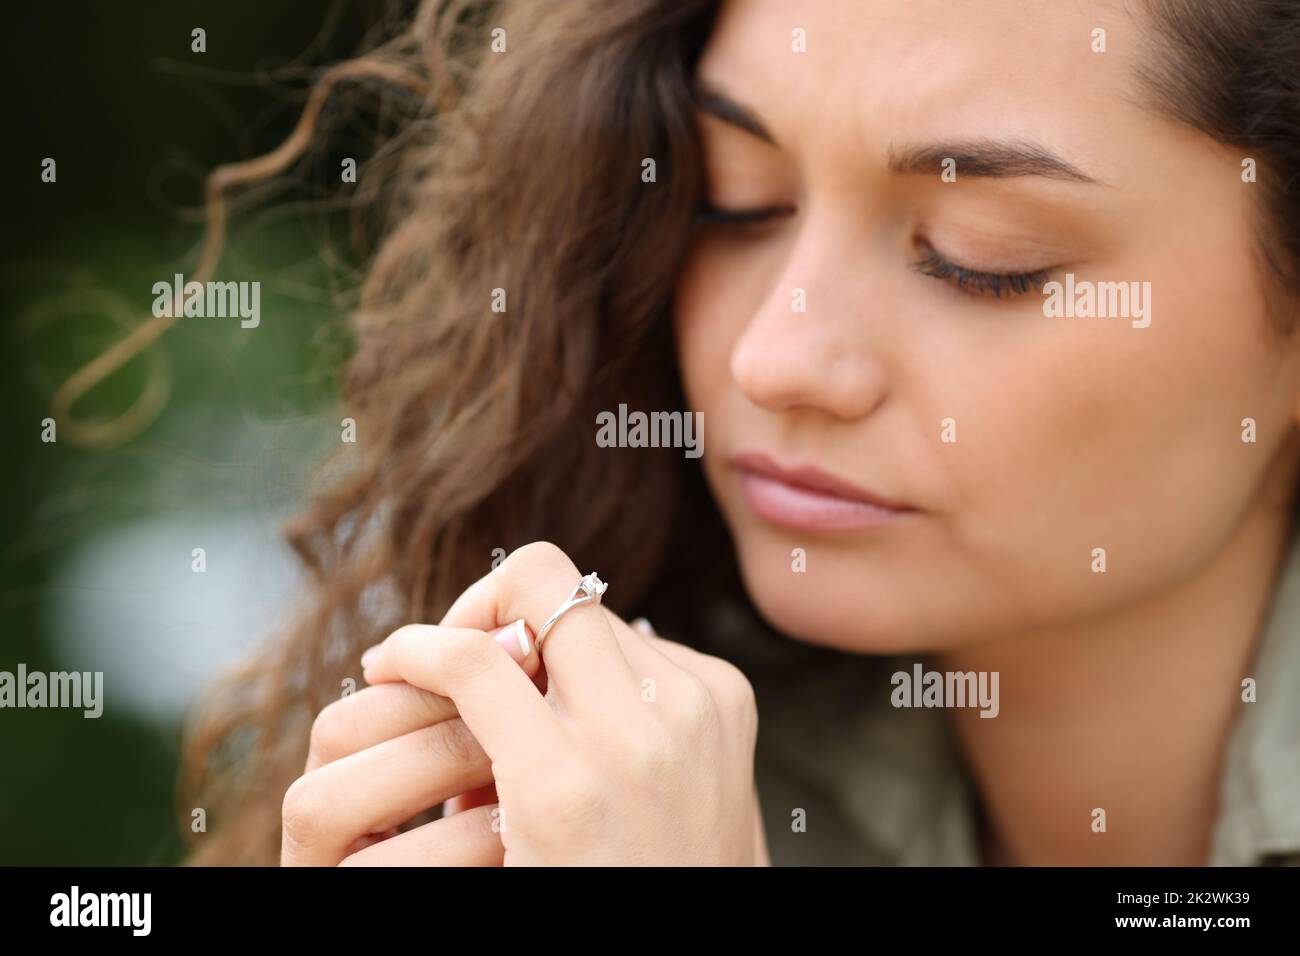 Woman looking at engagement ring in a park Stock Photo